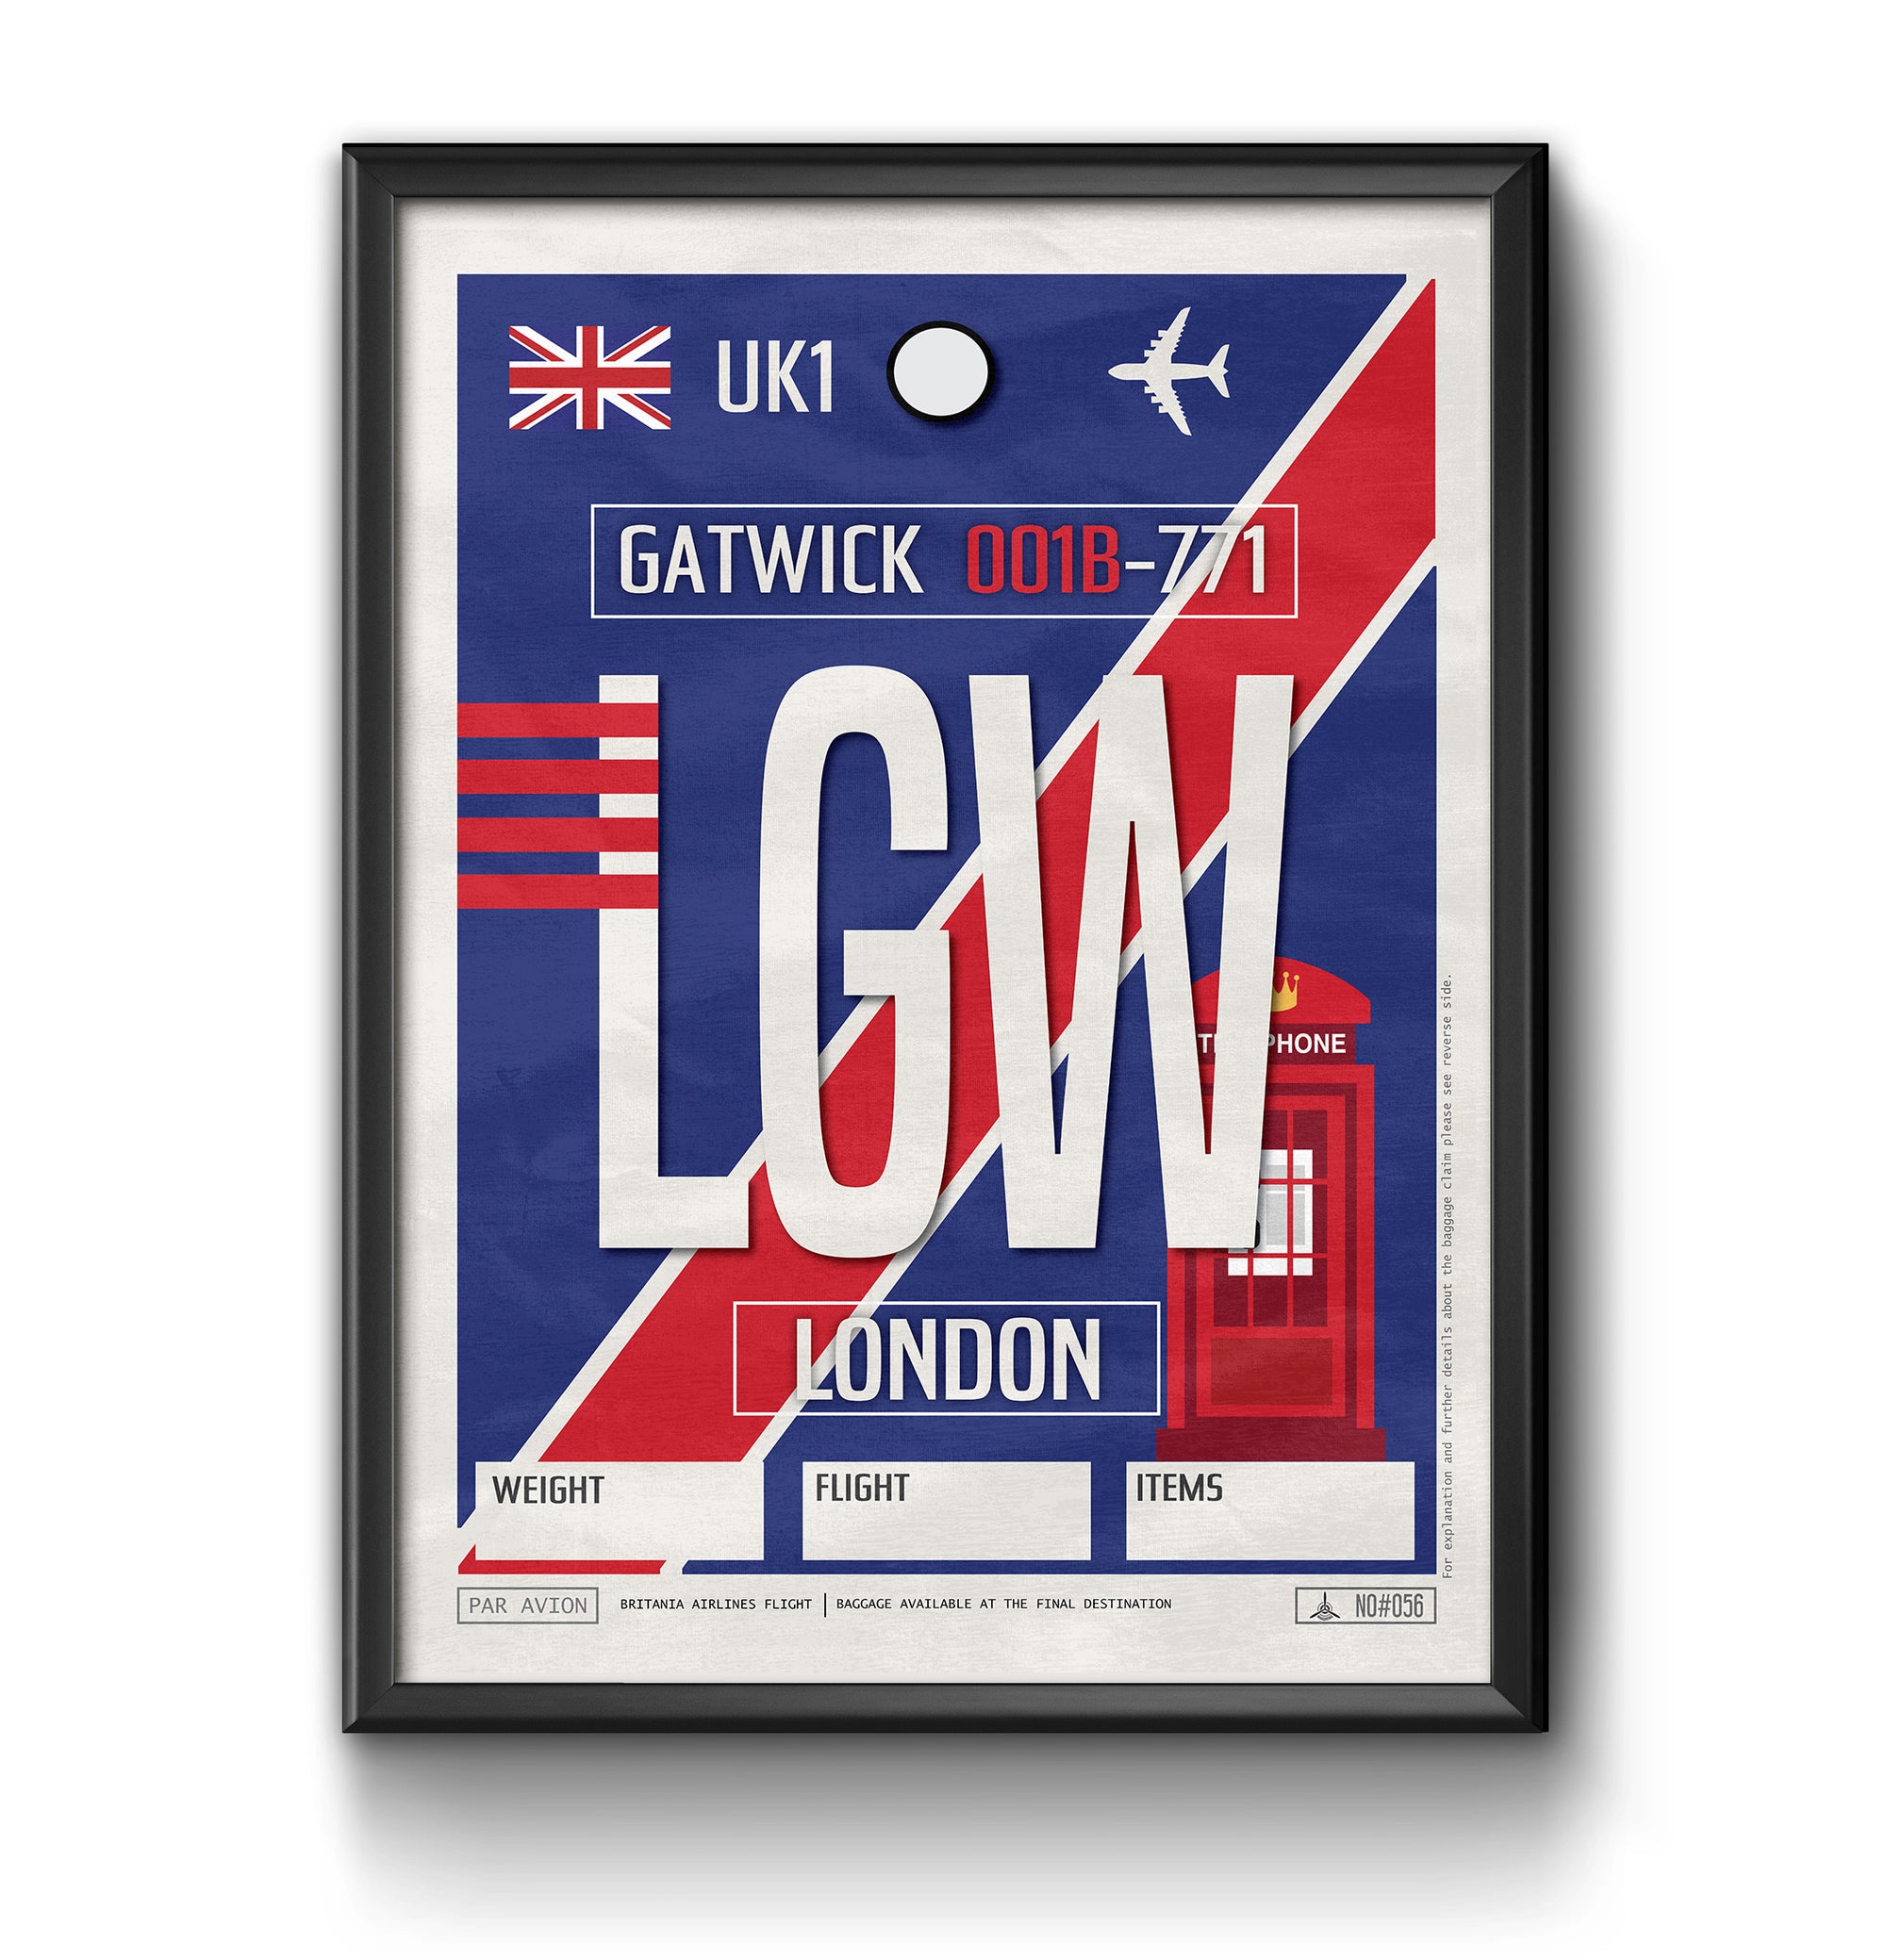 london gatwick UK LGW airport tag poster luggage tag 